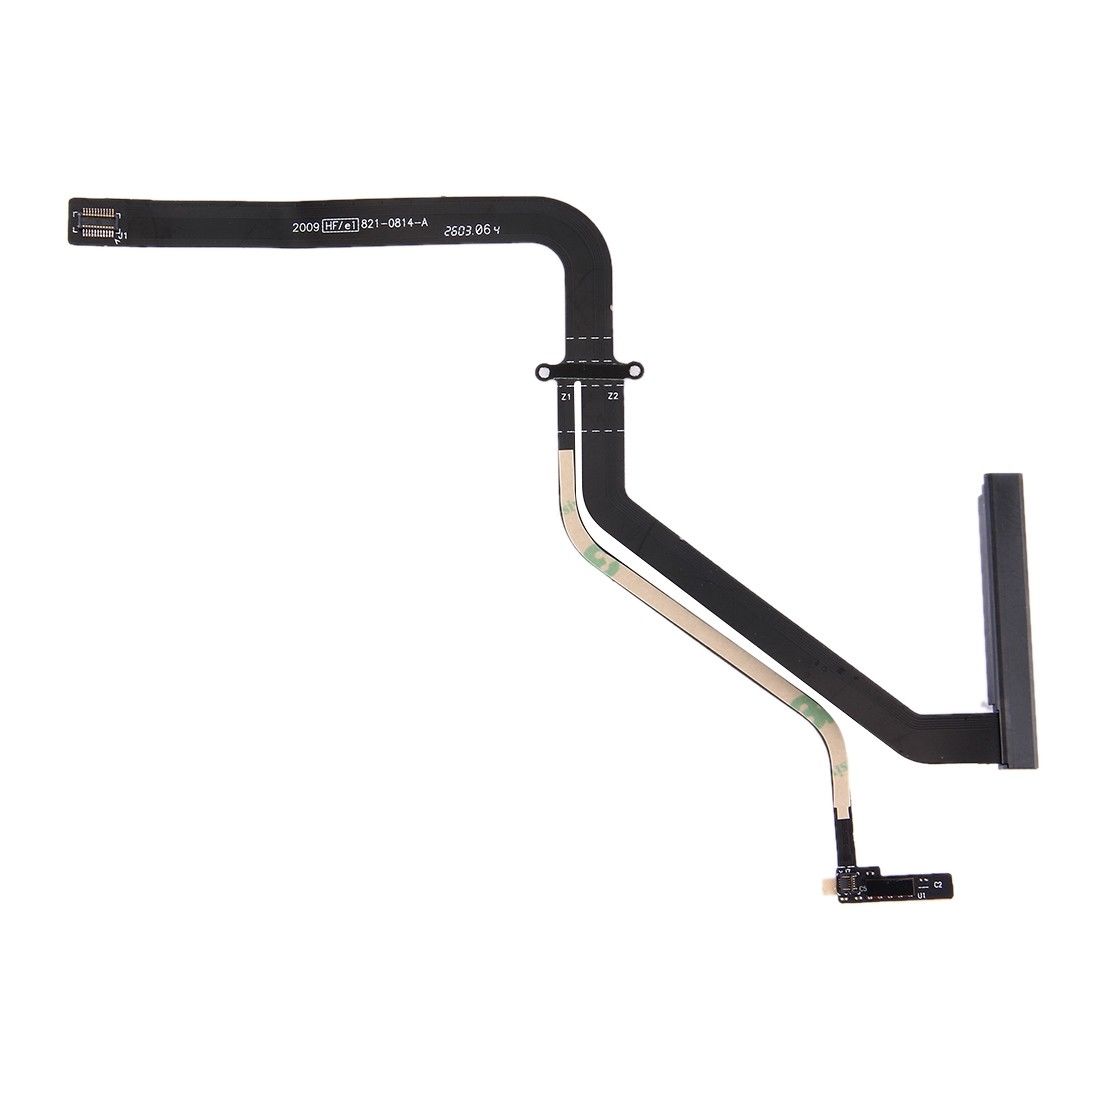 Macbook Pro 13" A1278 821-0814-A HDD Hard Drive Flex Cable for [product_price] - First Help Tech